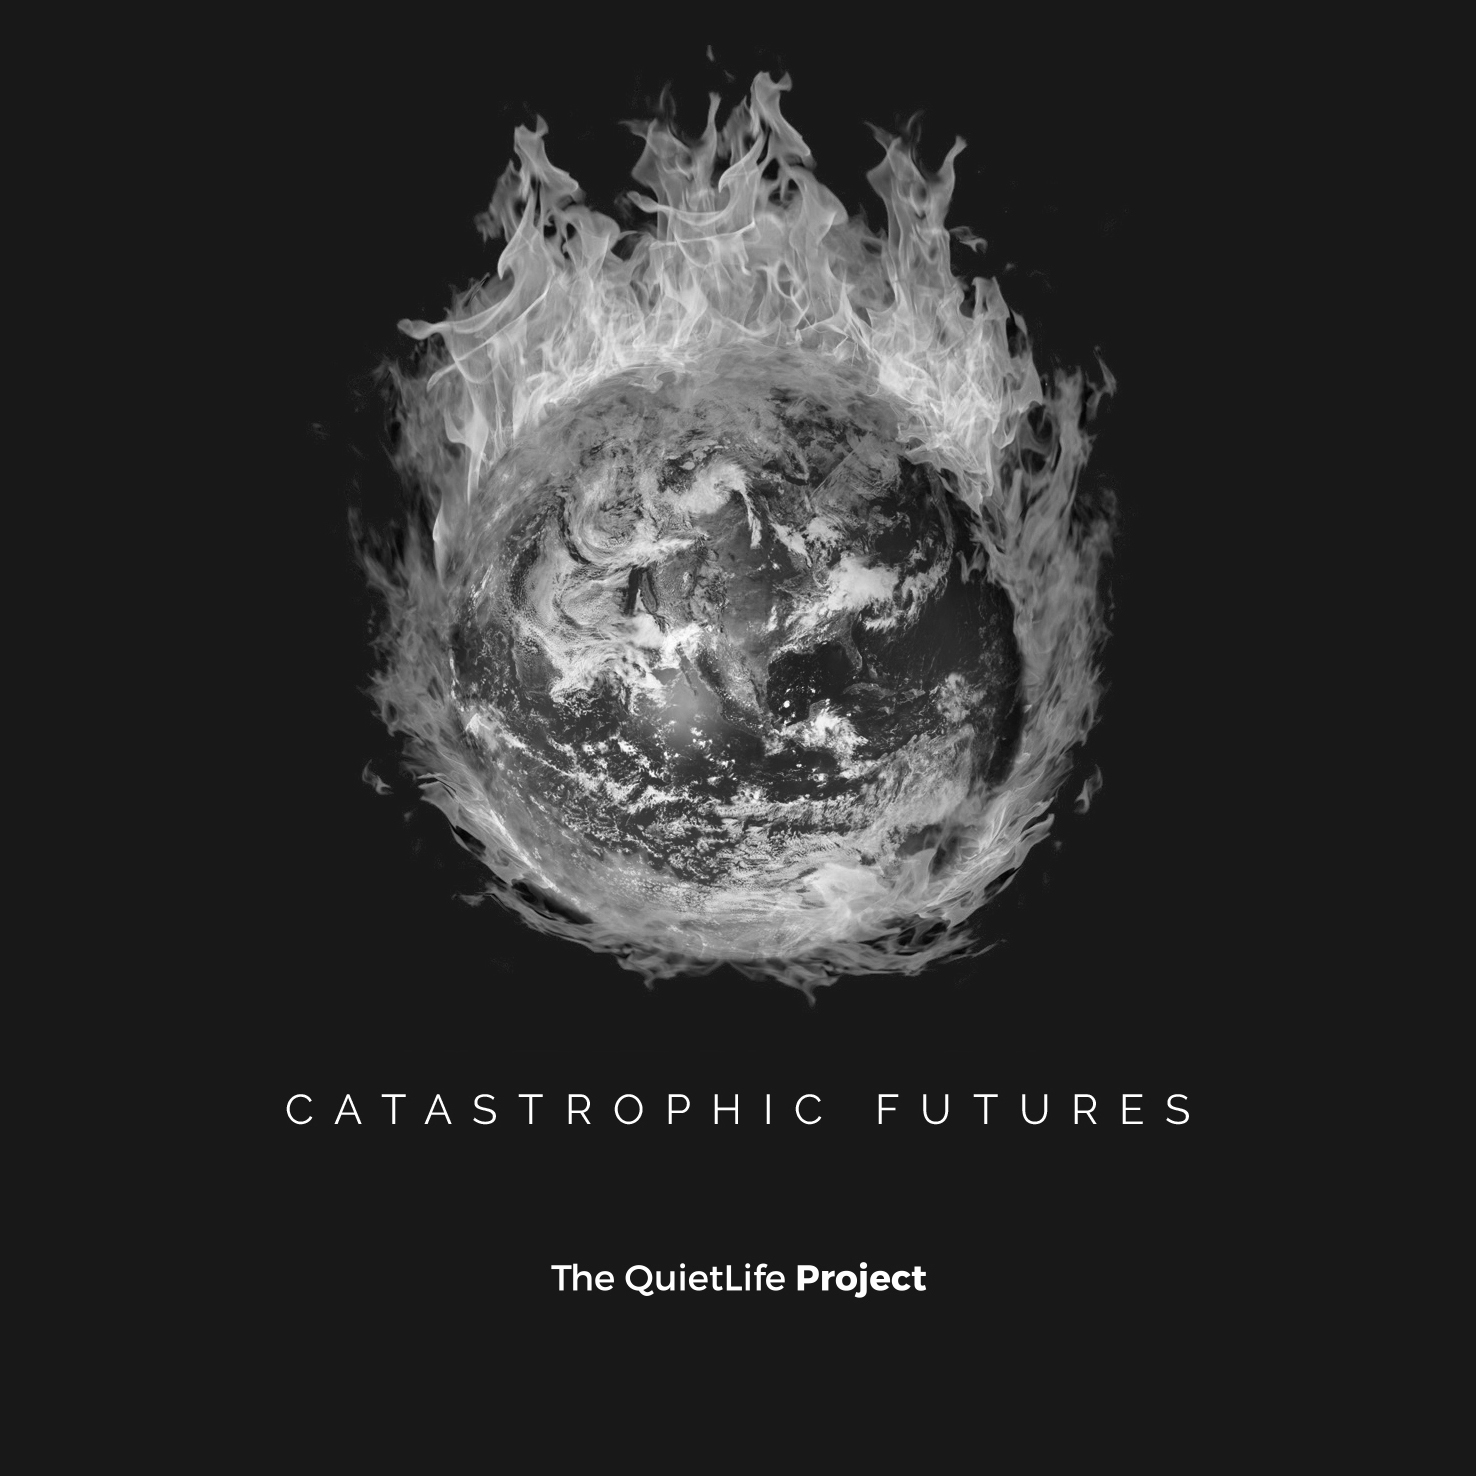 About The Song: For All We Know (Catastrophic Futures)